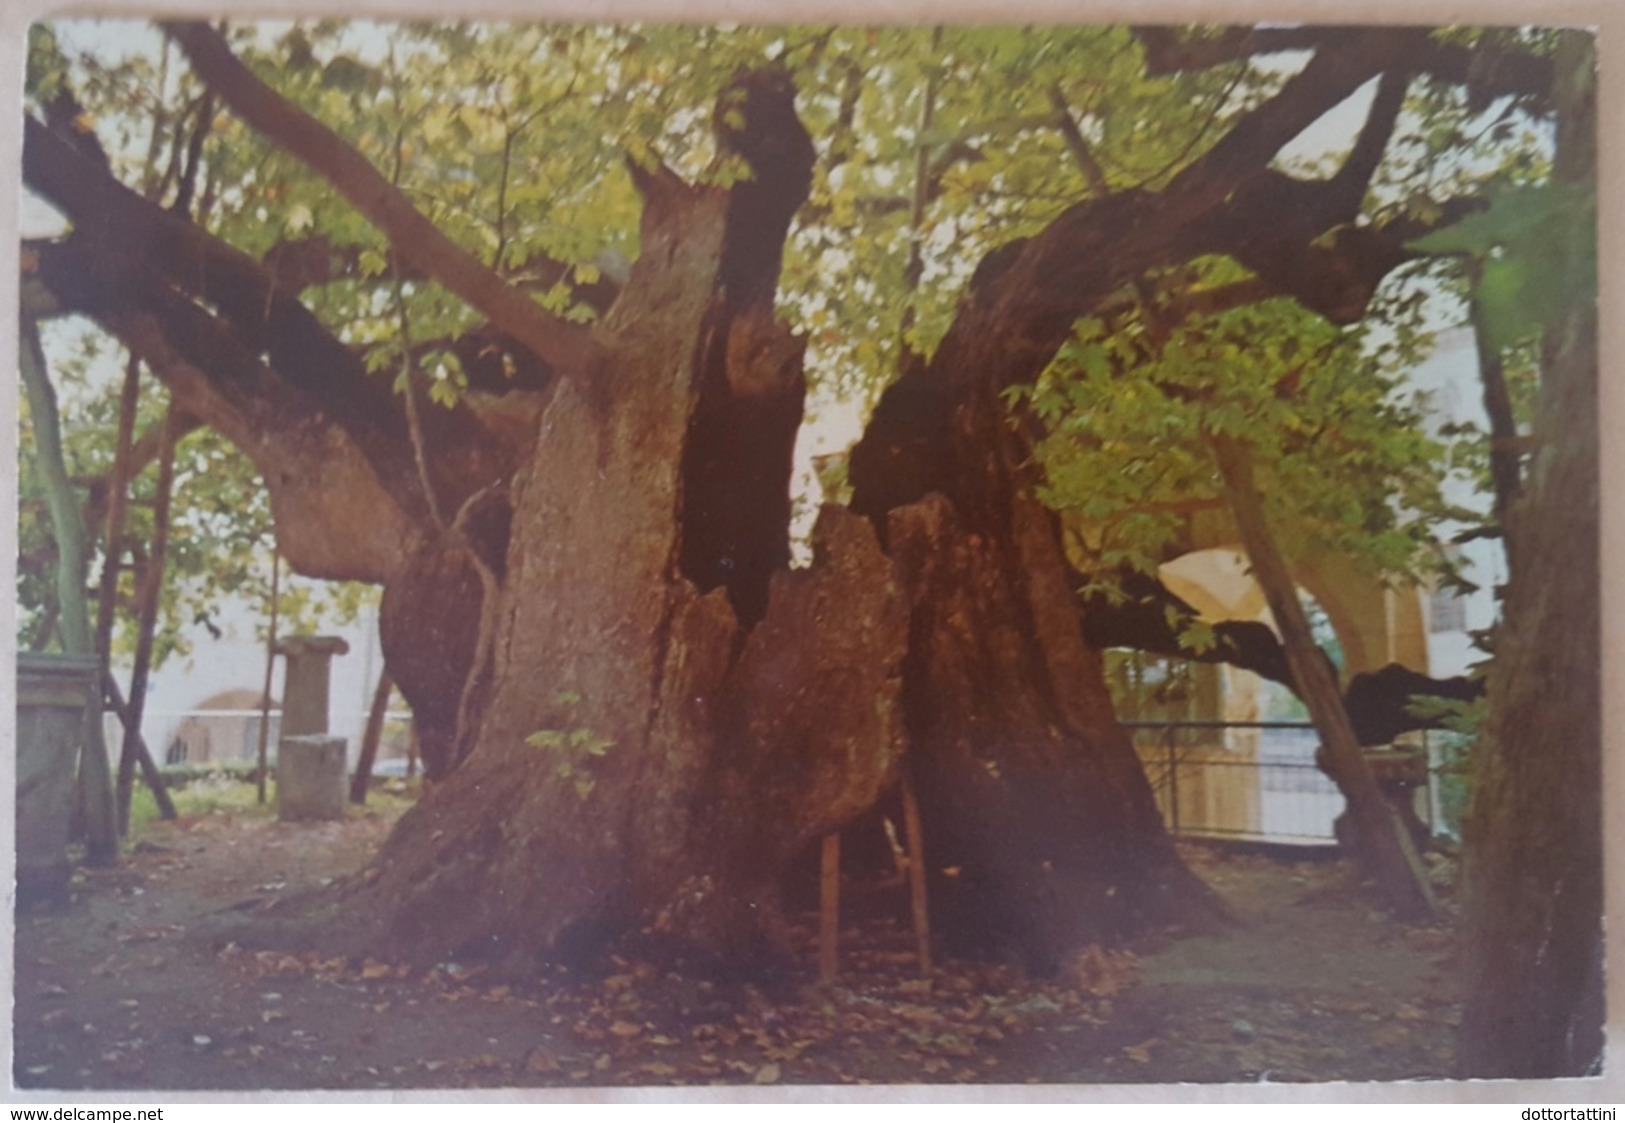 KOS - GREECE - THE PLANE-TREE OF HIPPOCRATES, OLDEST TREE OF EUROPE - PLATANE DES HIPPOKRATES - PLATANO - Arbres